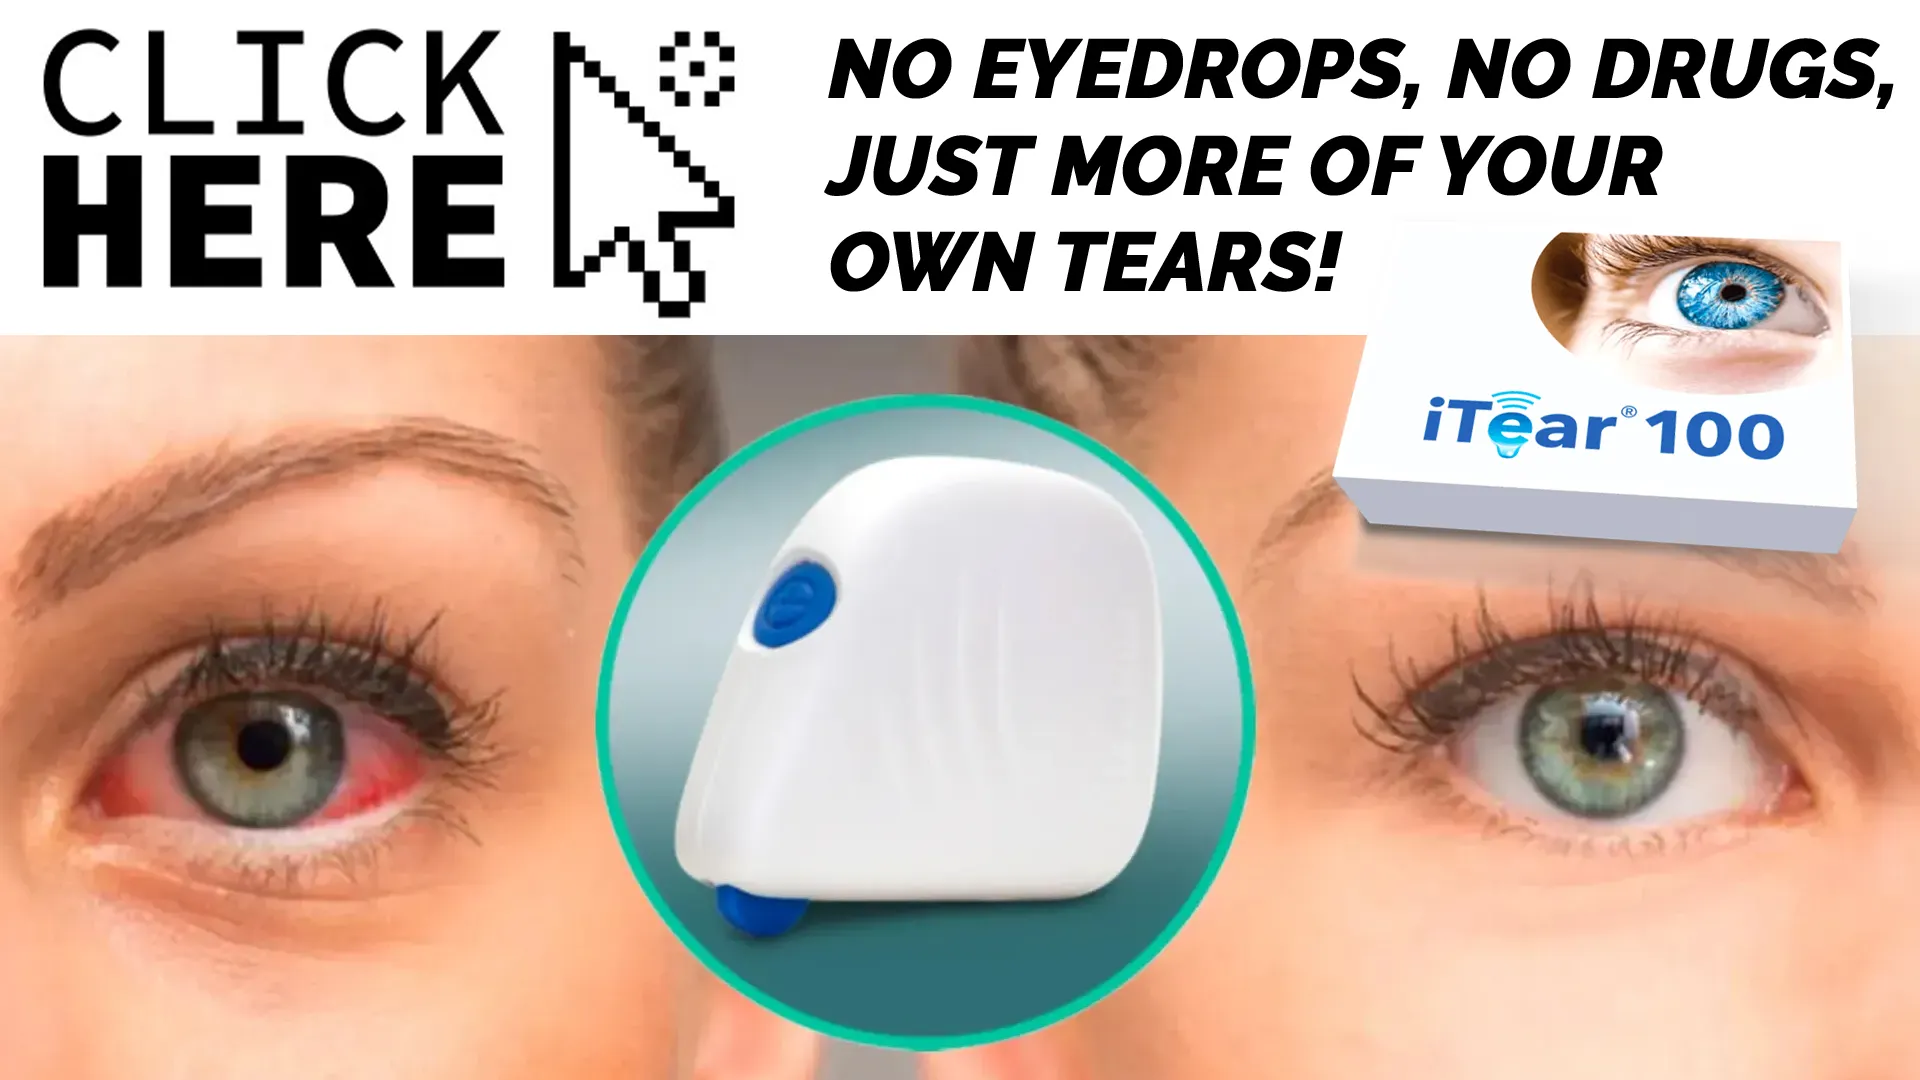 Why Choose iTear100 Over Other Dry Eye Solutions?